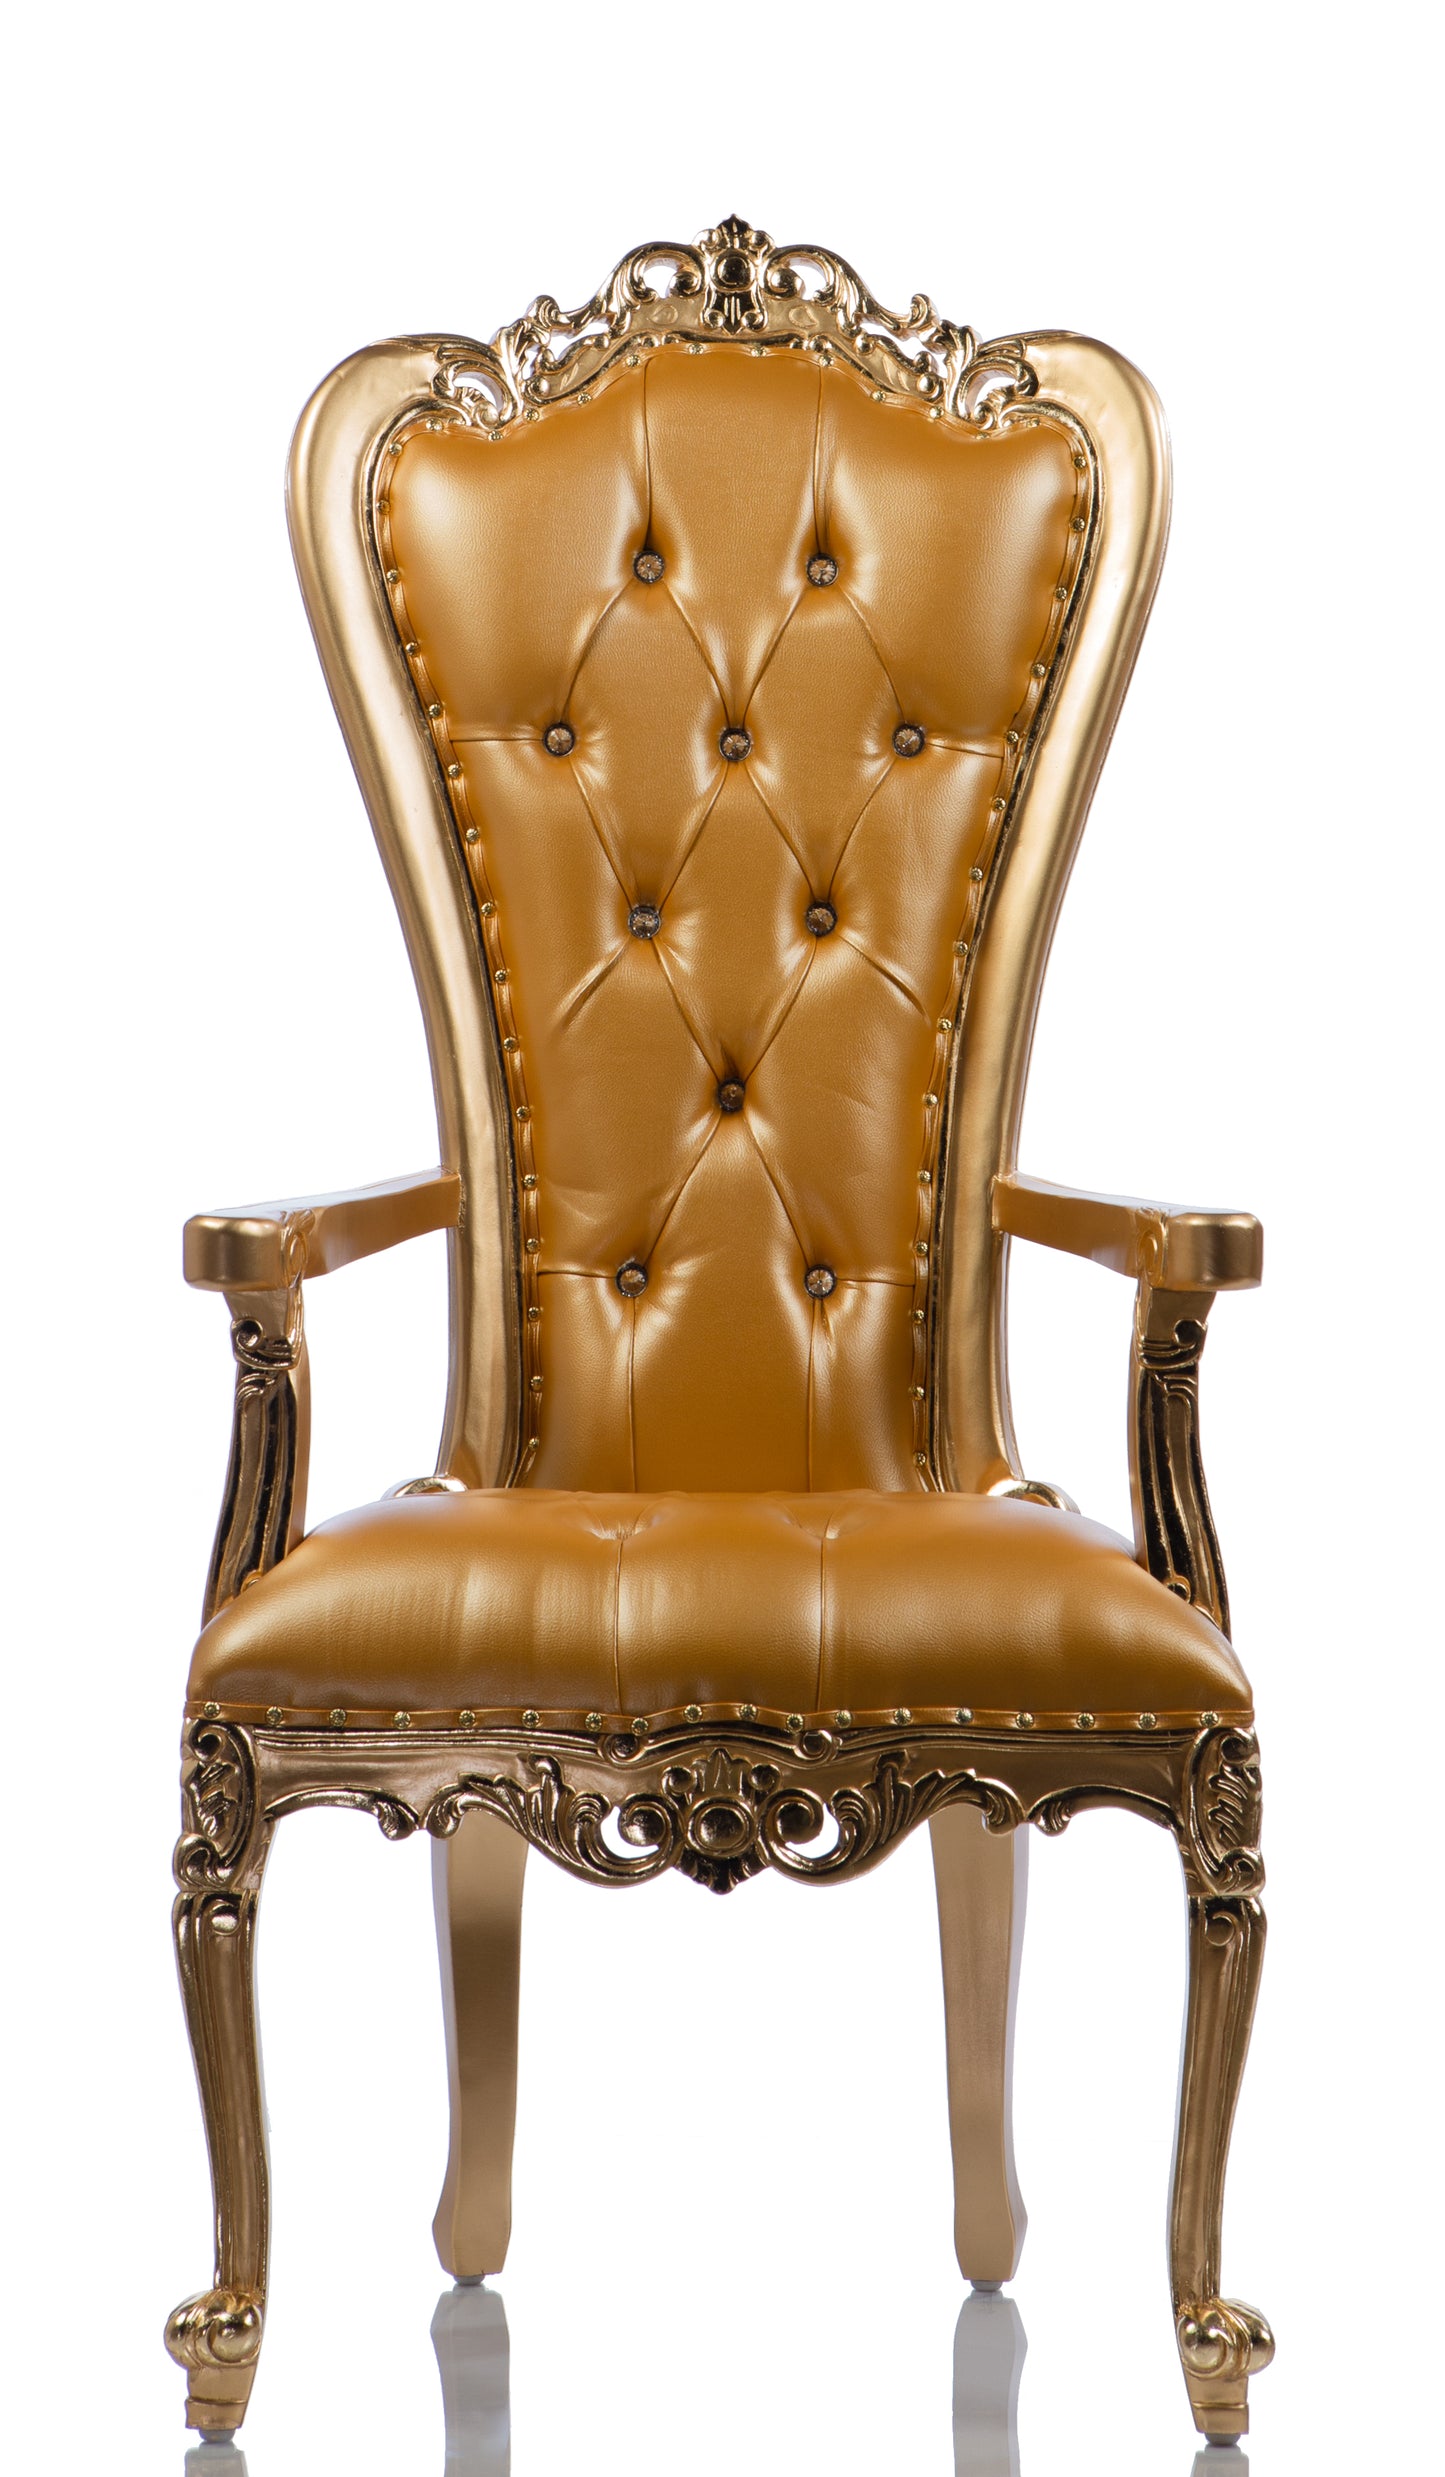 "The Golden Glam" Arm Chair Throne Gold/Gold (West Coast)